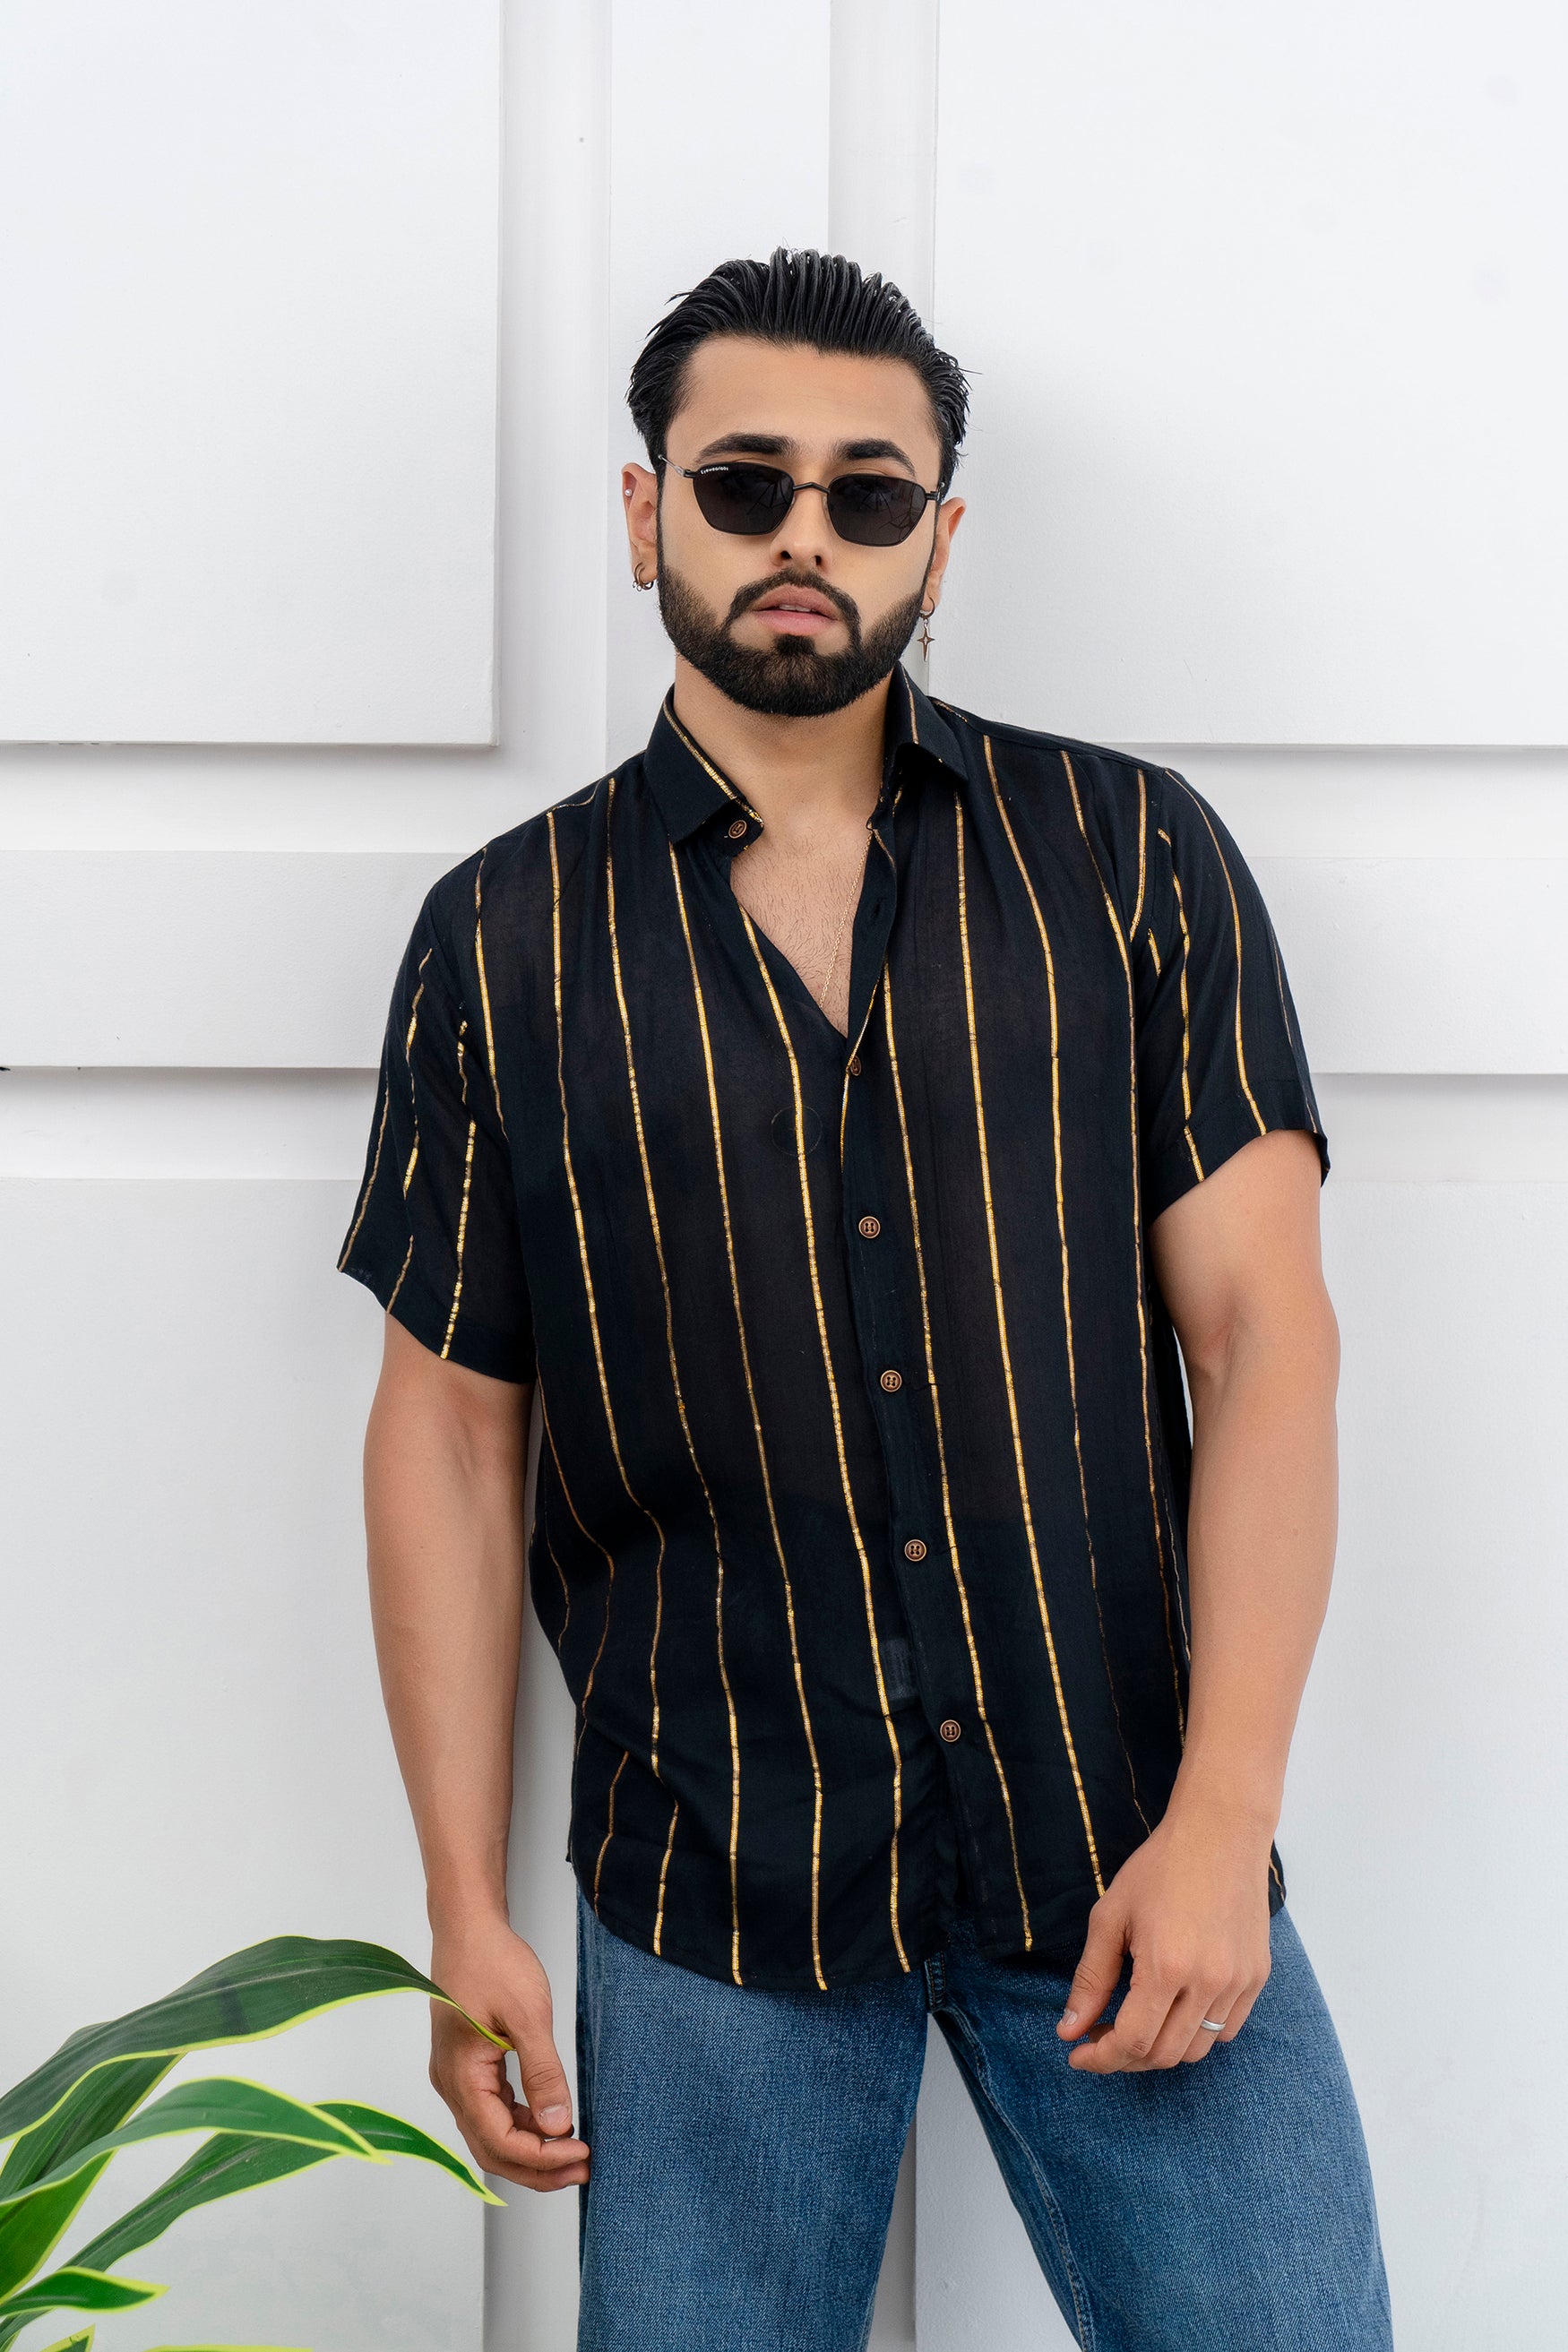 Firangi Yarn Relaxed Fit Super Flowy Re-engineered Cotton Lurex- Half Sleeves Party Shirt Black Gold